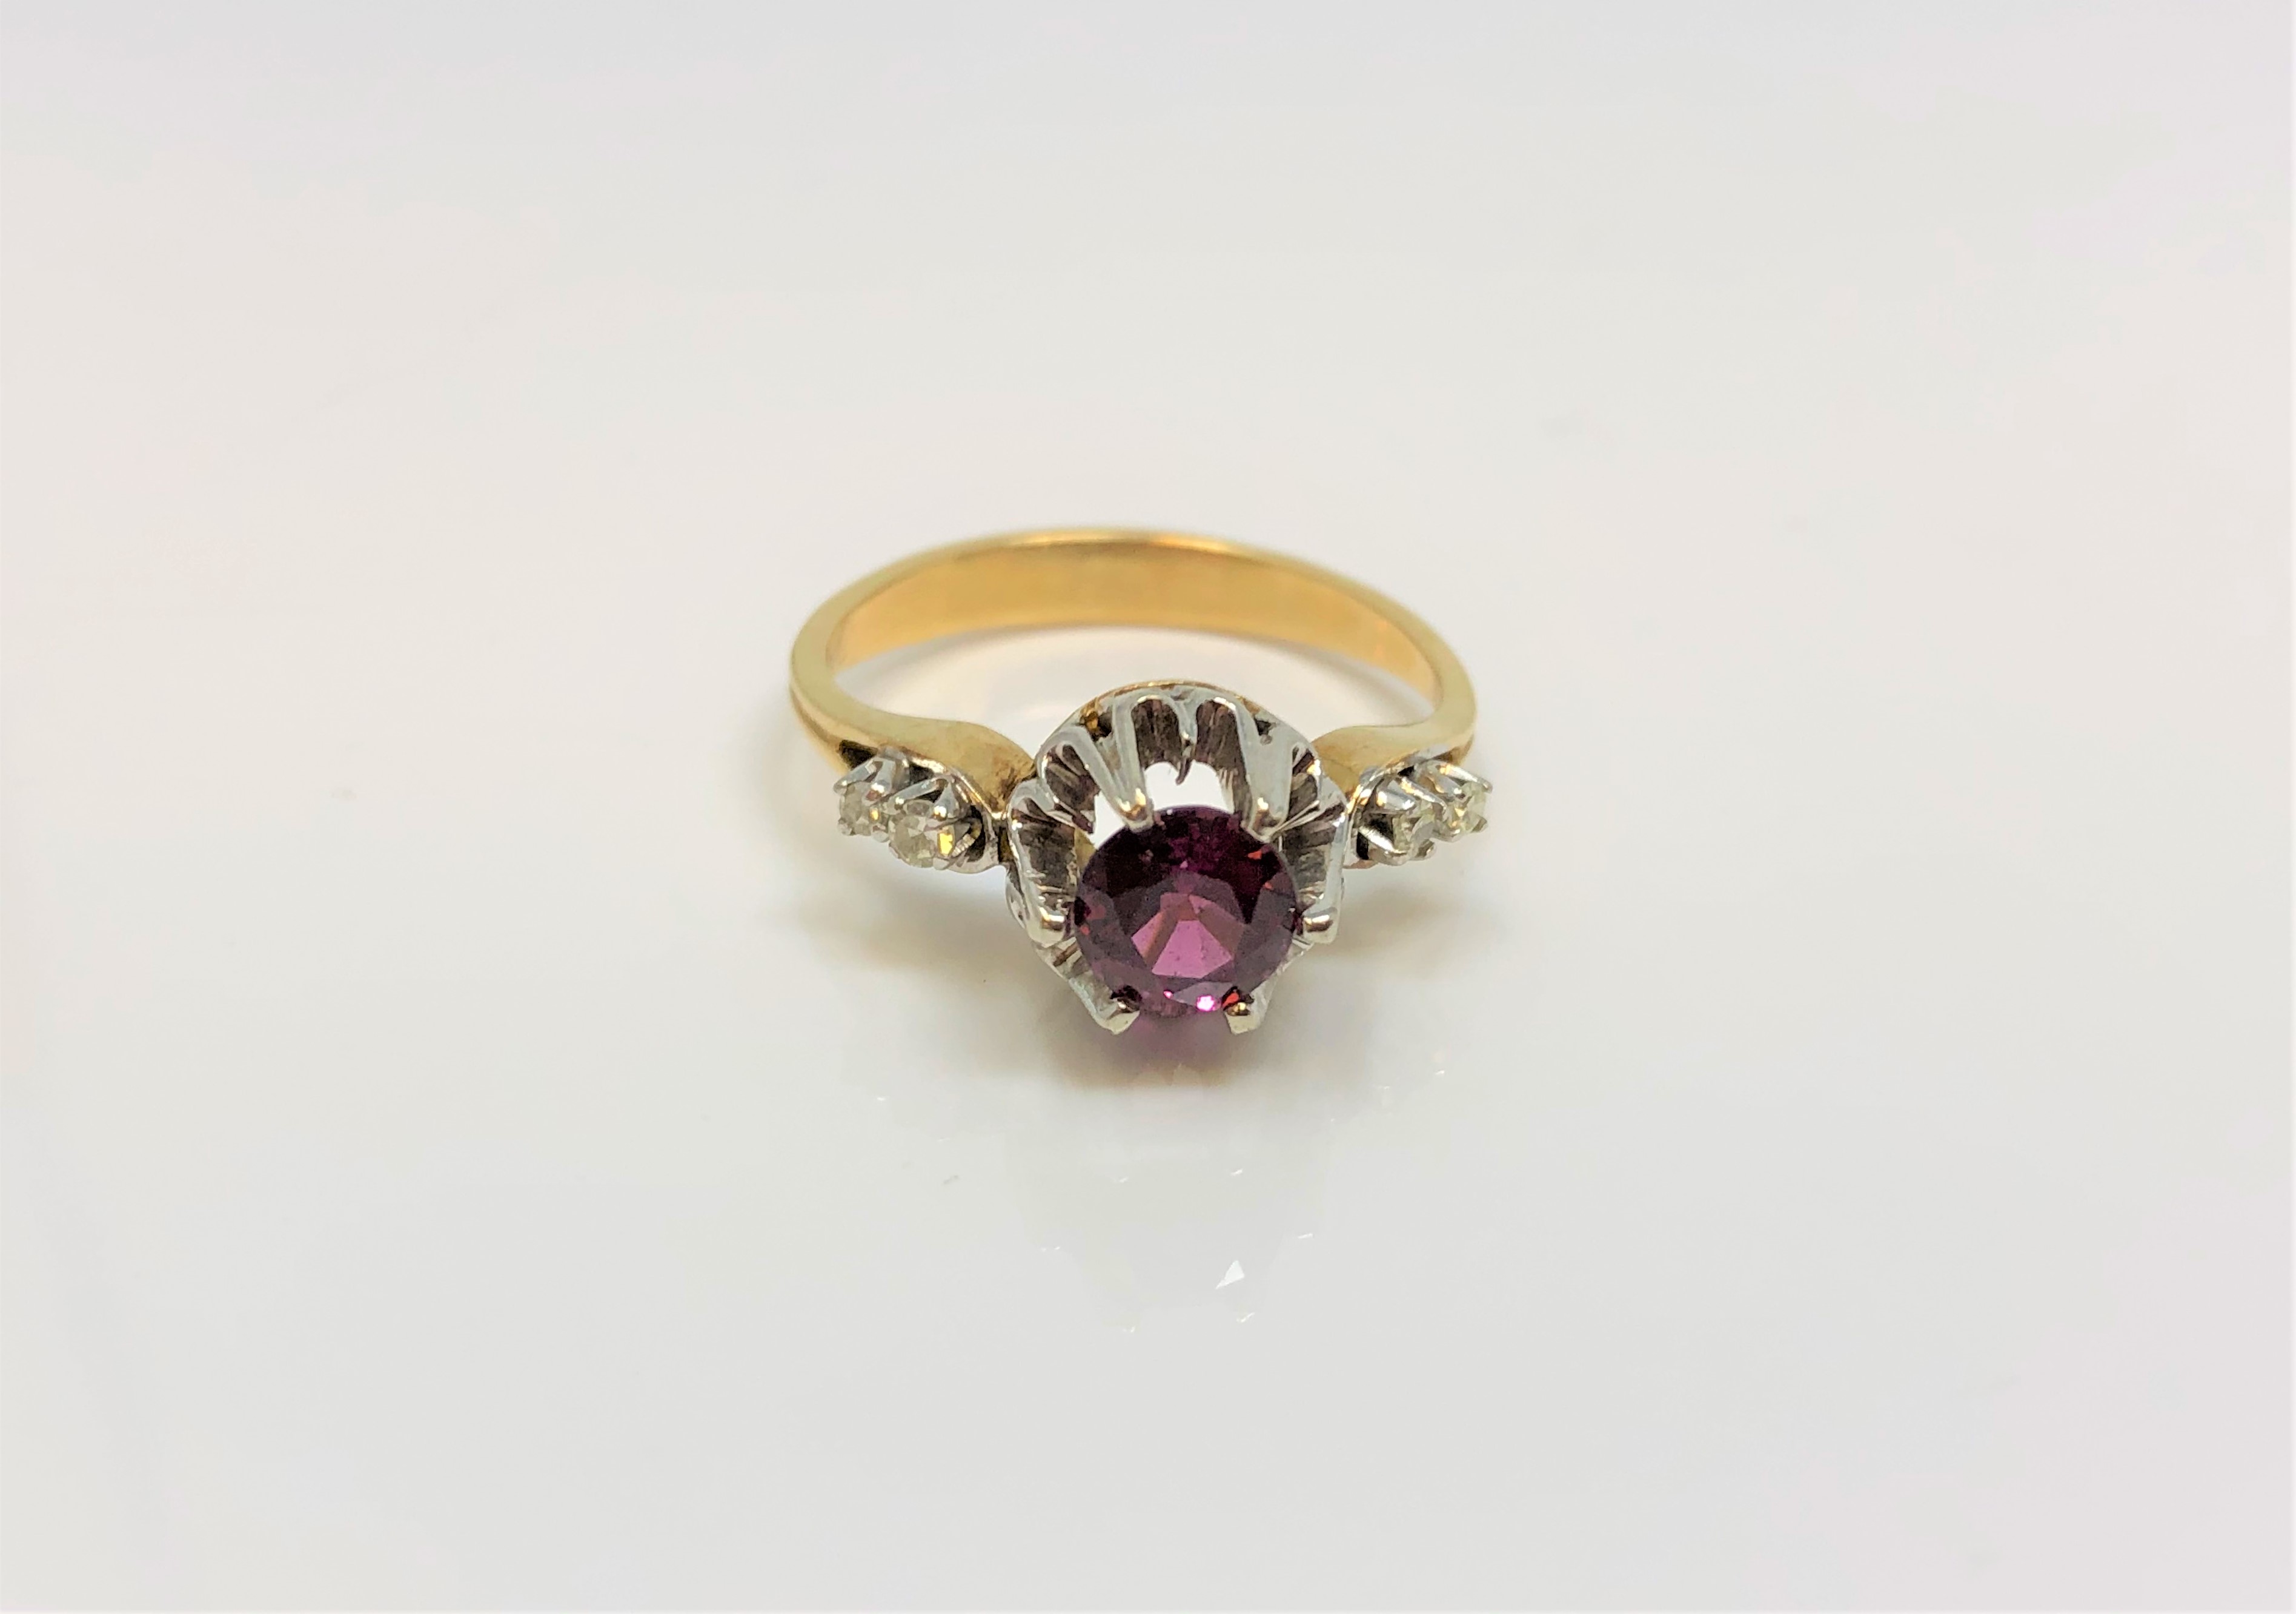 An 18ct yellow gold diamond set ring, the central stone possibly garnet, size O/P.